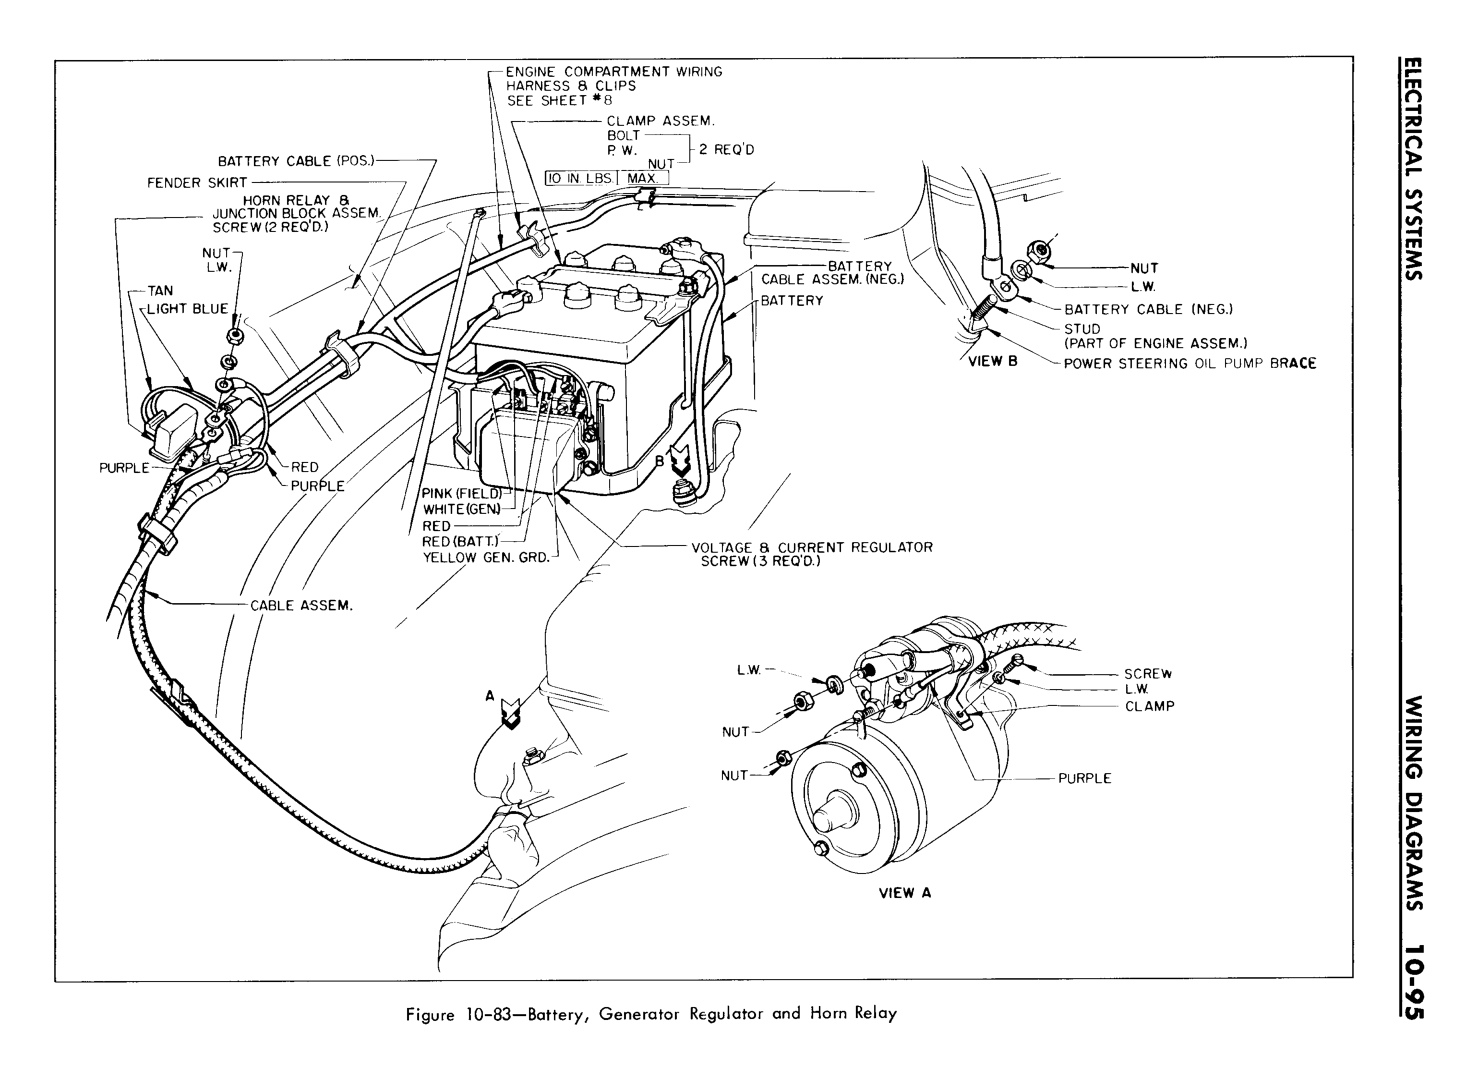 n_10 1961 Buick Shop Manual - Electrical Systems-095-095.jpg